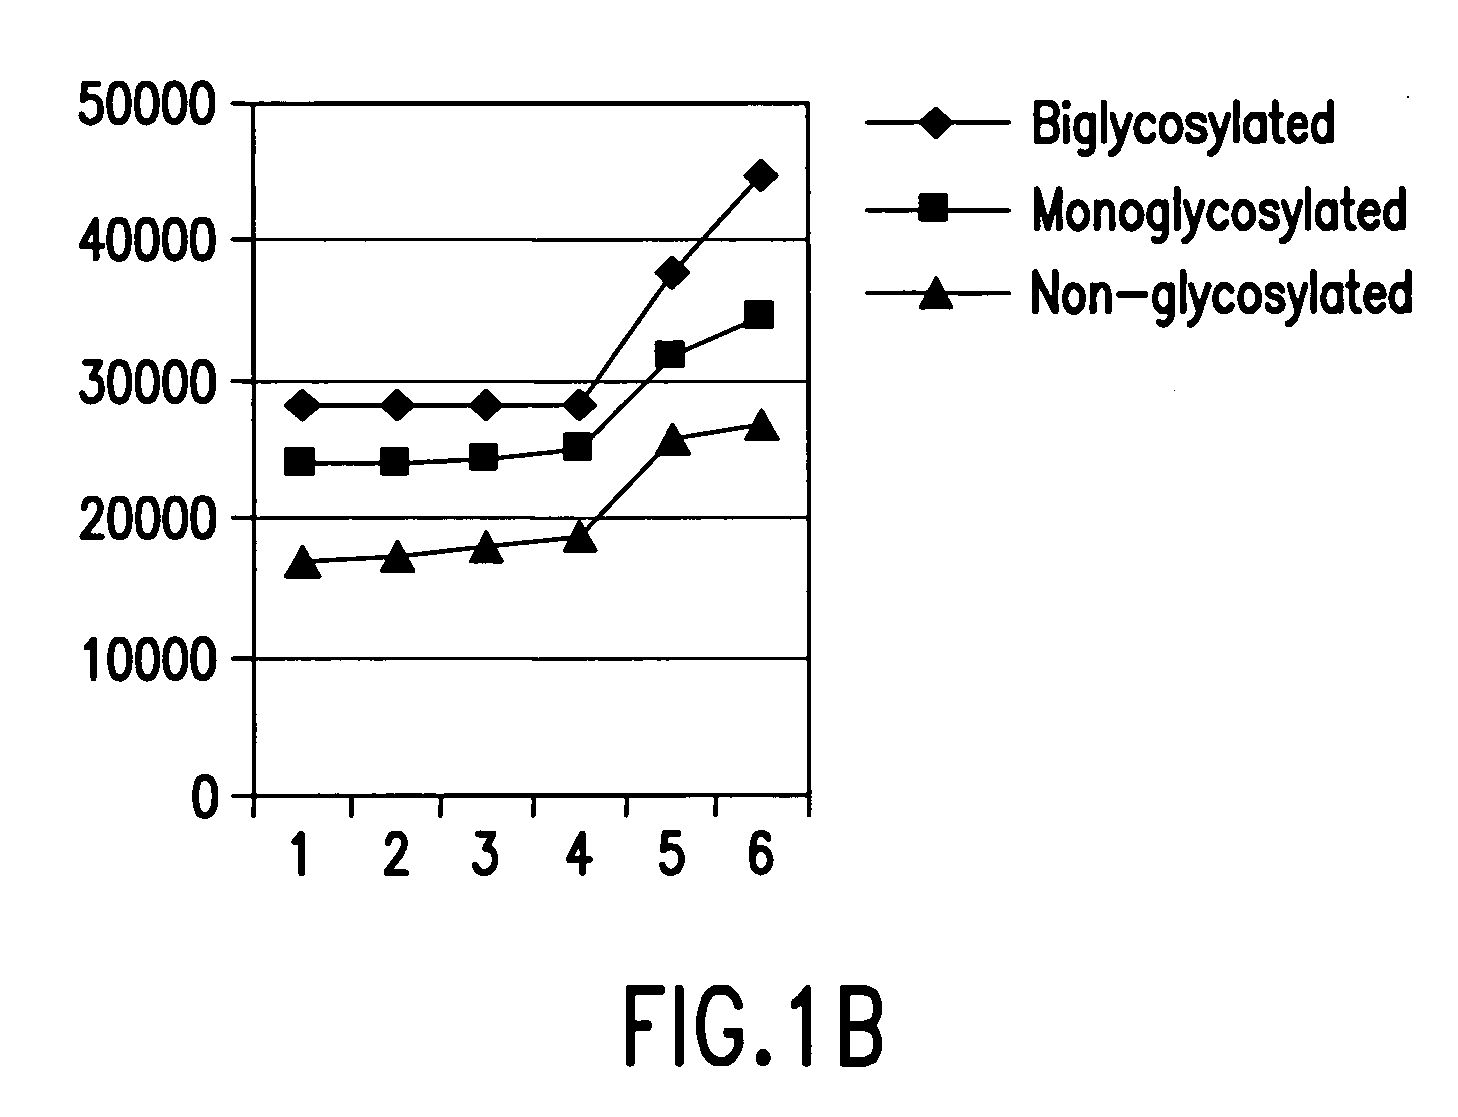 Process for detecting PRPsc using an antibiotic from the family of aminoglycosides